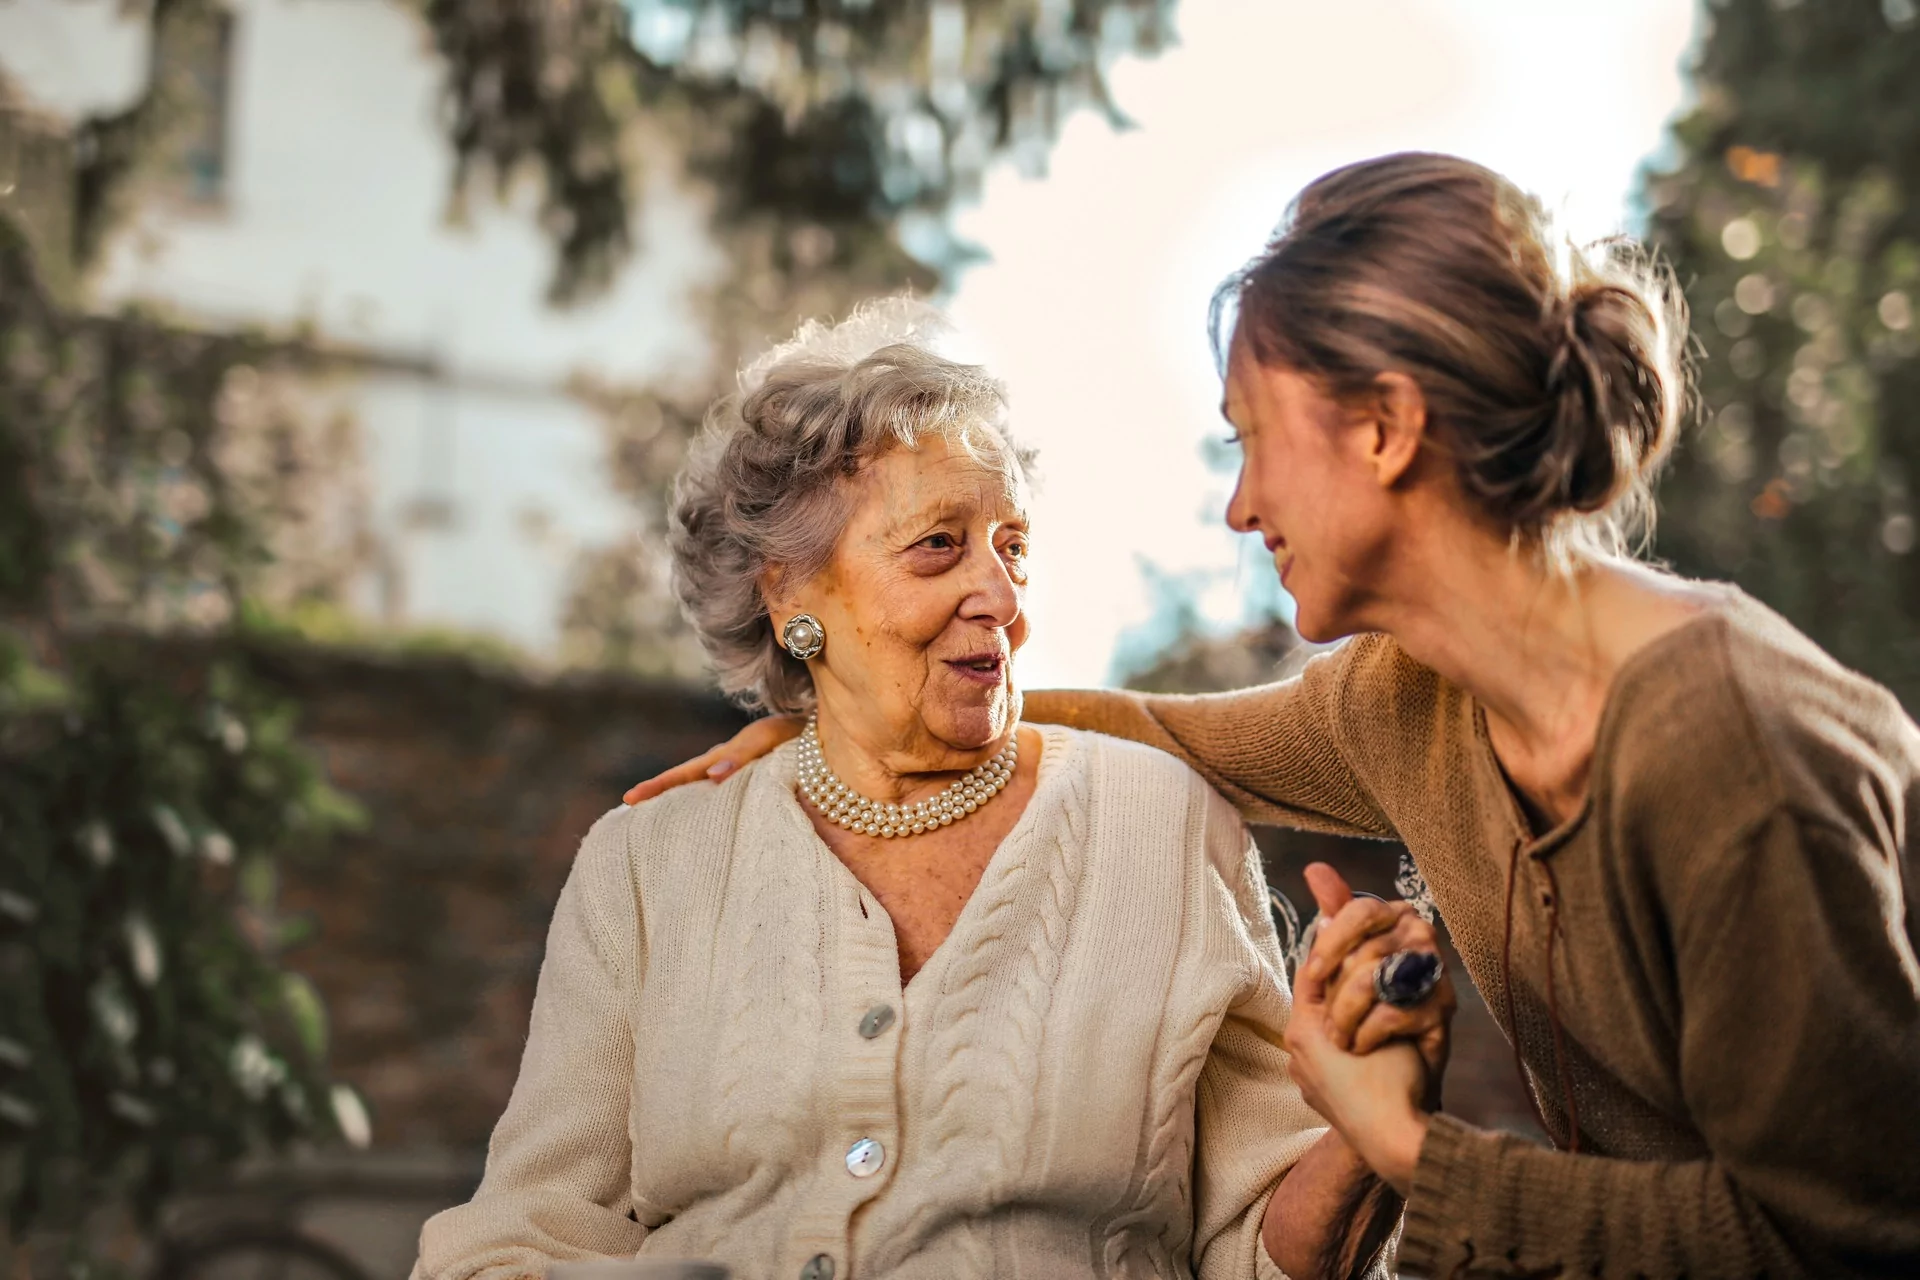 Helping Aging Parents – When a Little Means a Lot